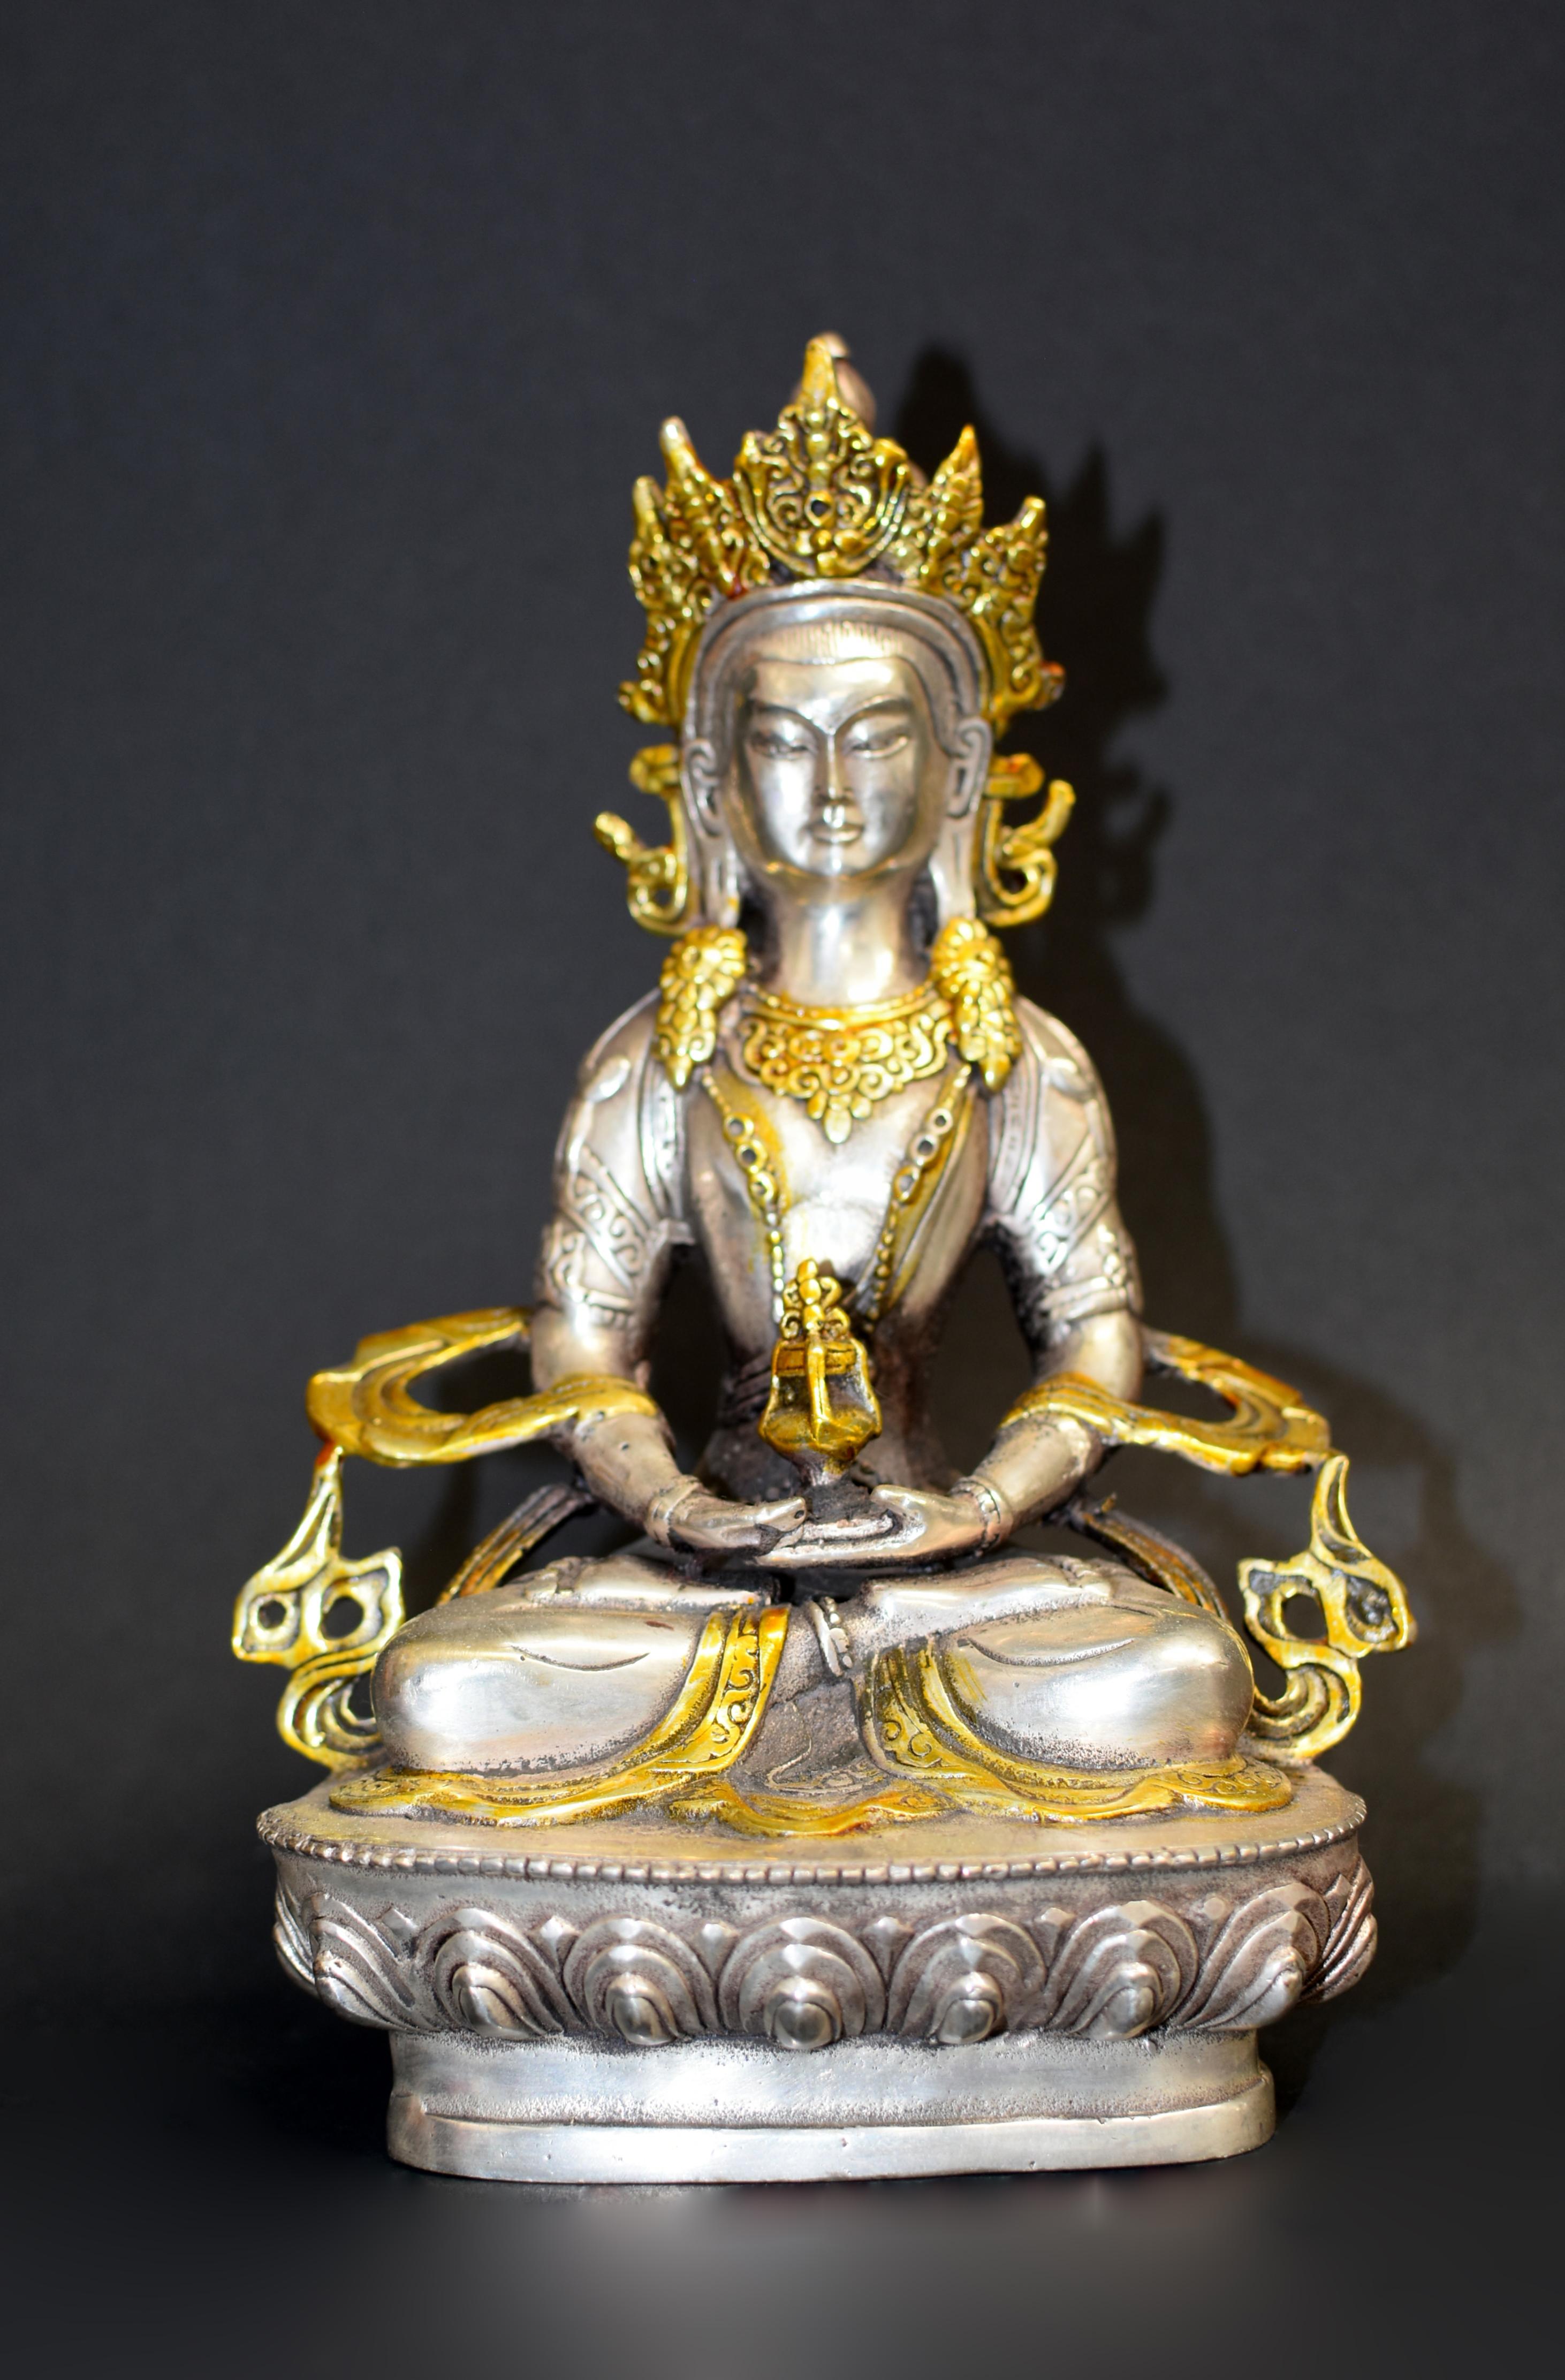 A beautiful statue of Tibetan Bodhisattva Amitayus, God of Longevity. The handsome face with downcast eyes and pursed lips, hair pulled away, gathered in a high chignon and adorned by an elaborate crown. A tight robe cinched at the waist, wrapped